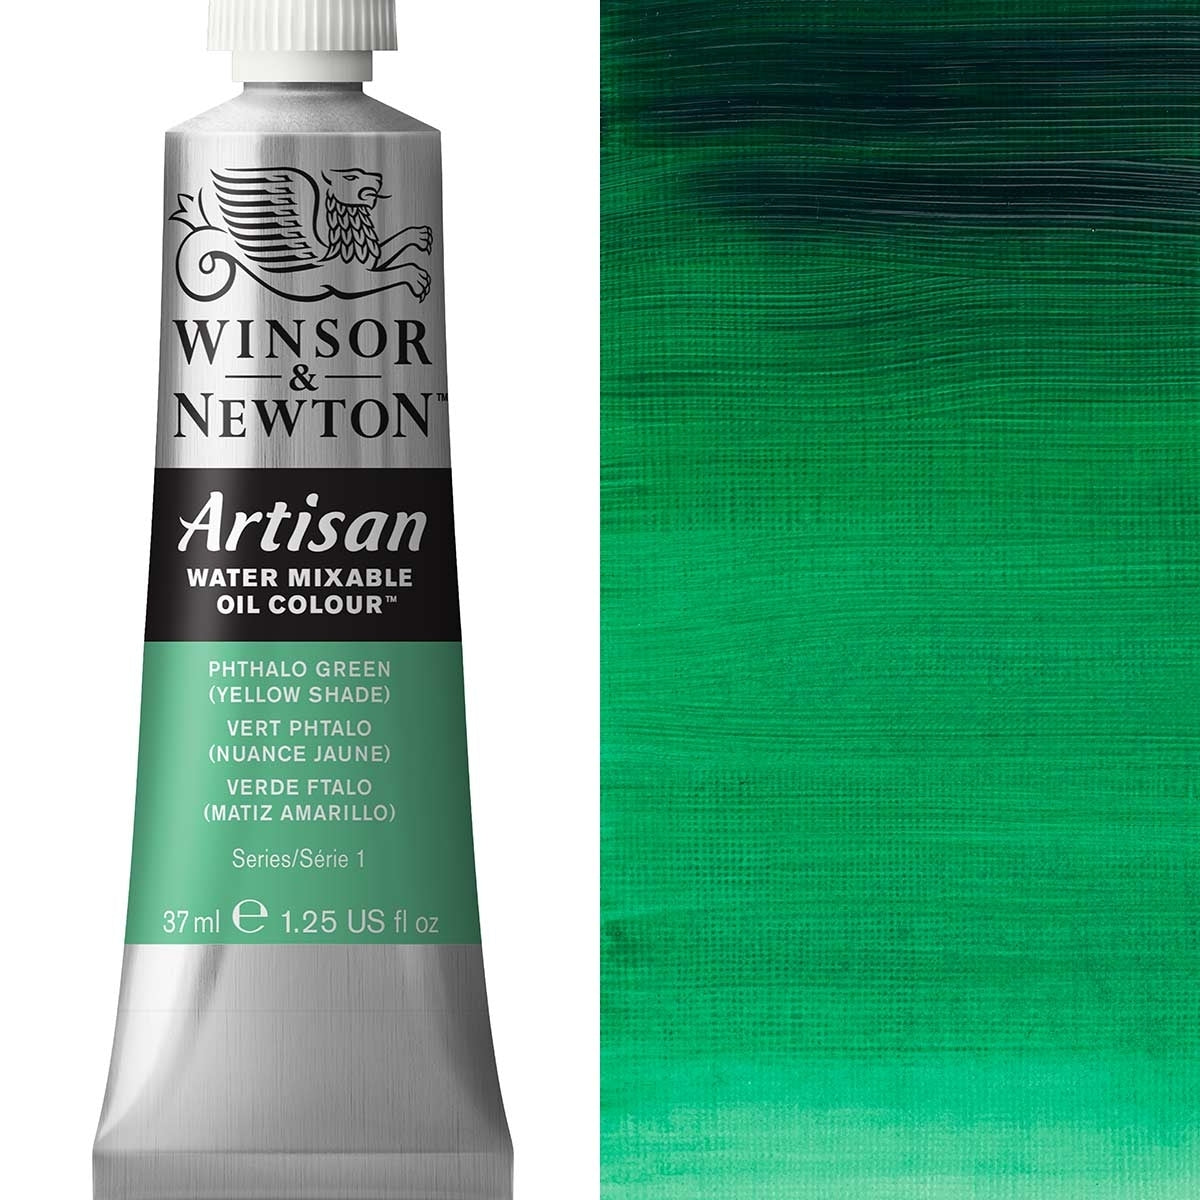 Winsor and Newton - Artisan Oil Colour Watermixable - 37ml - Phthalo Green Yellow Shade